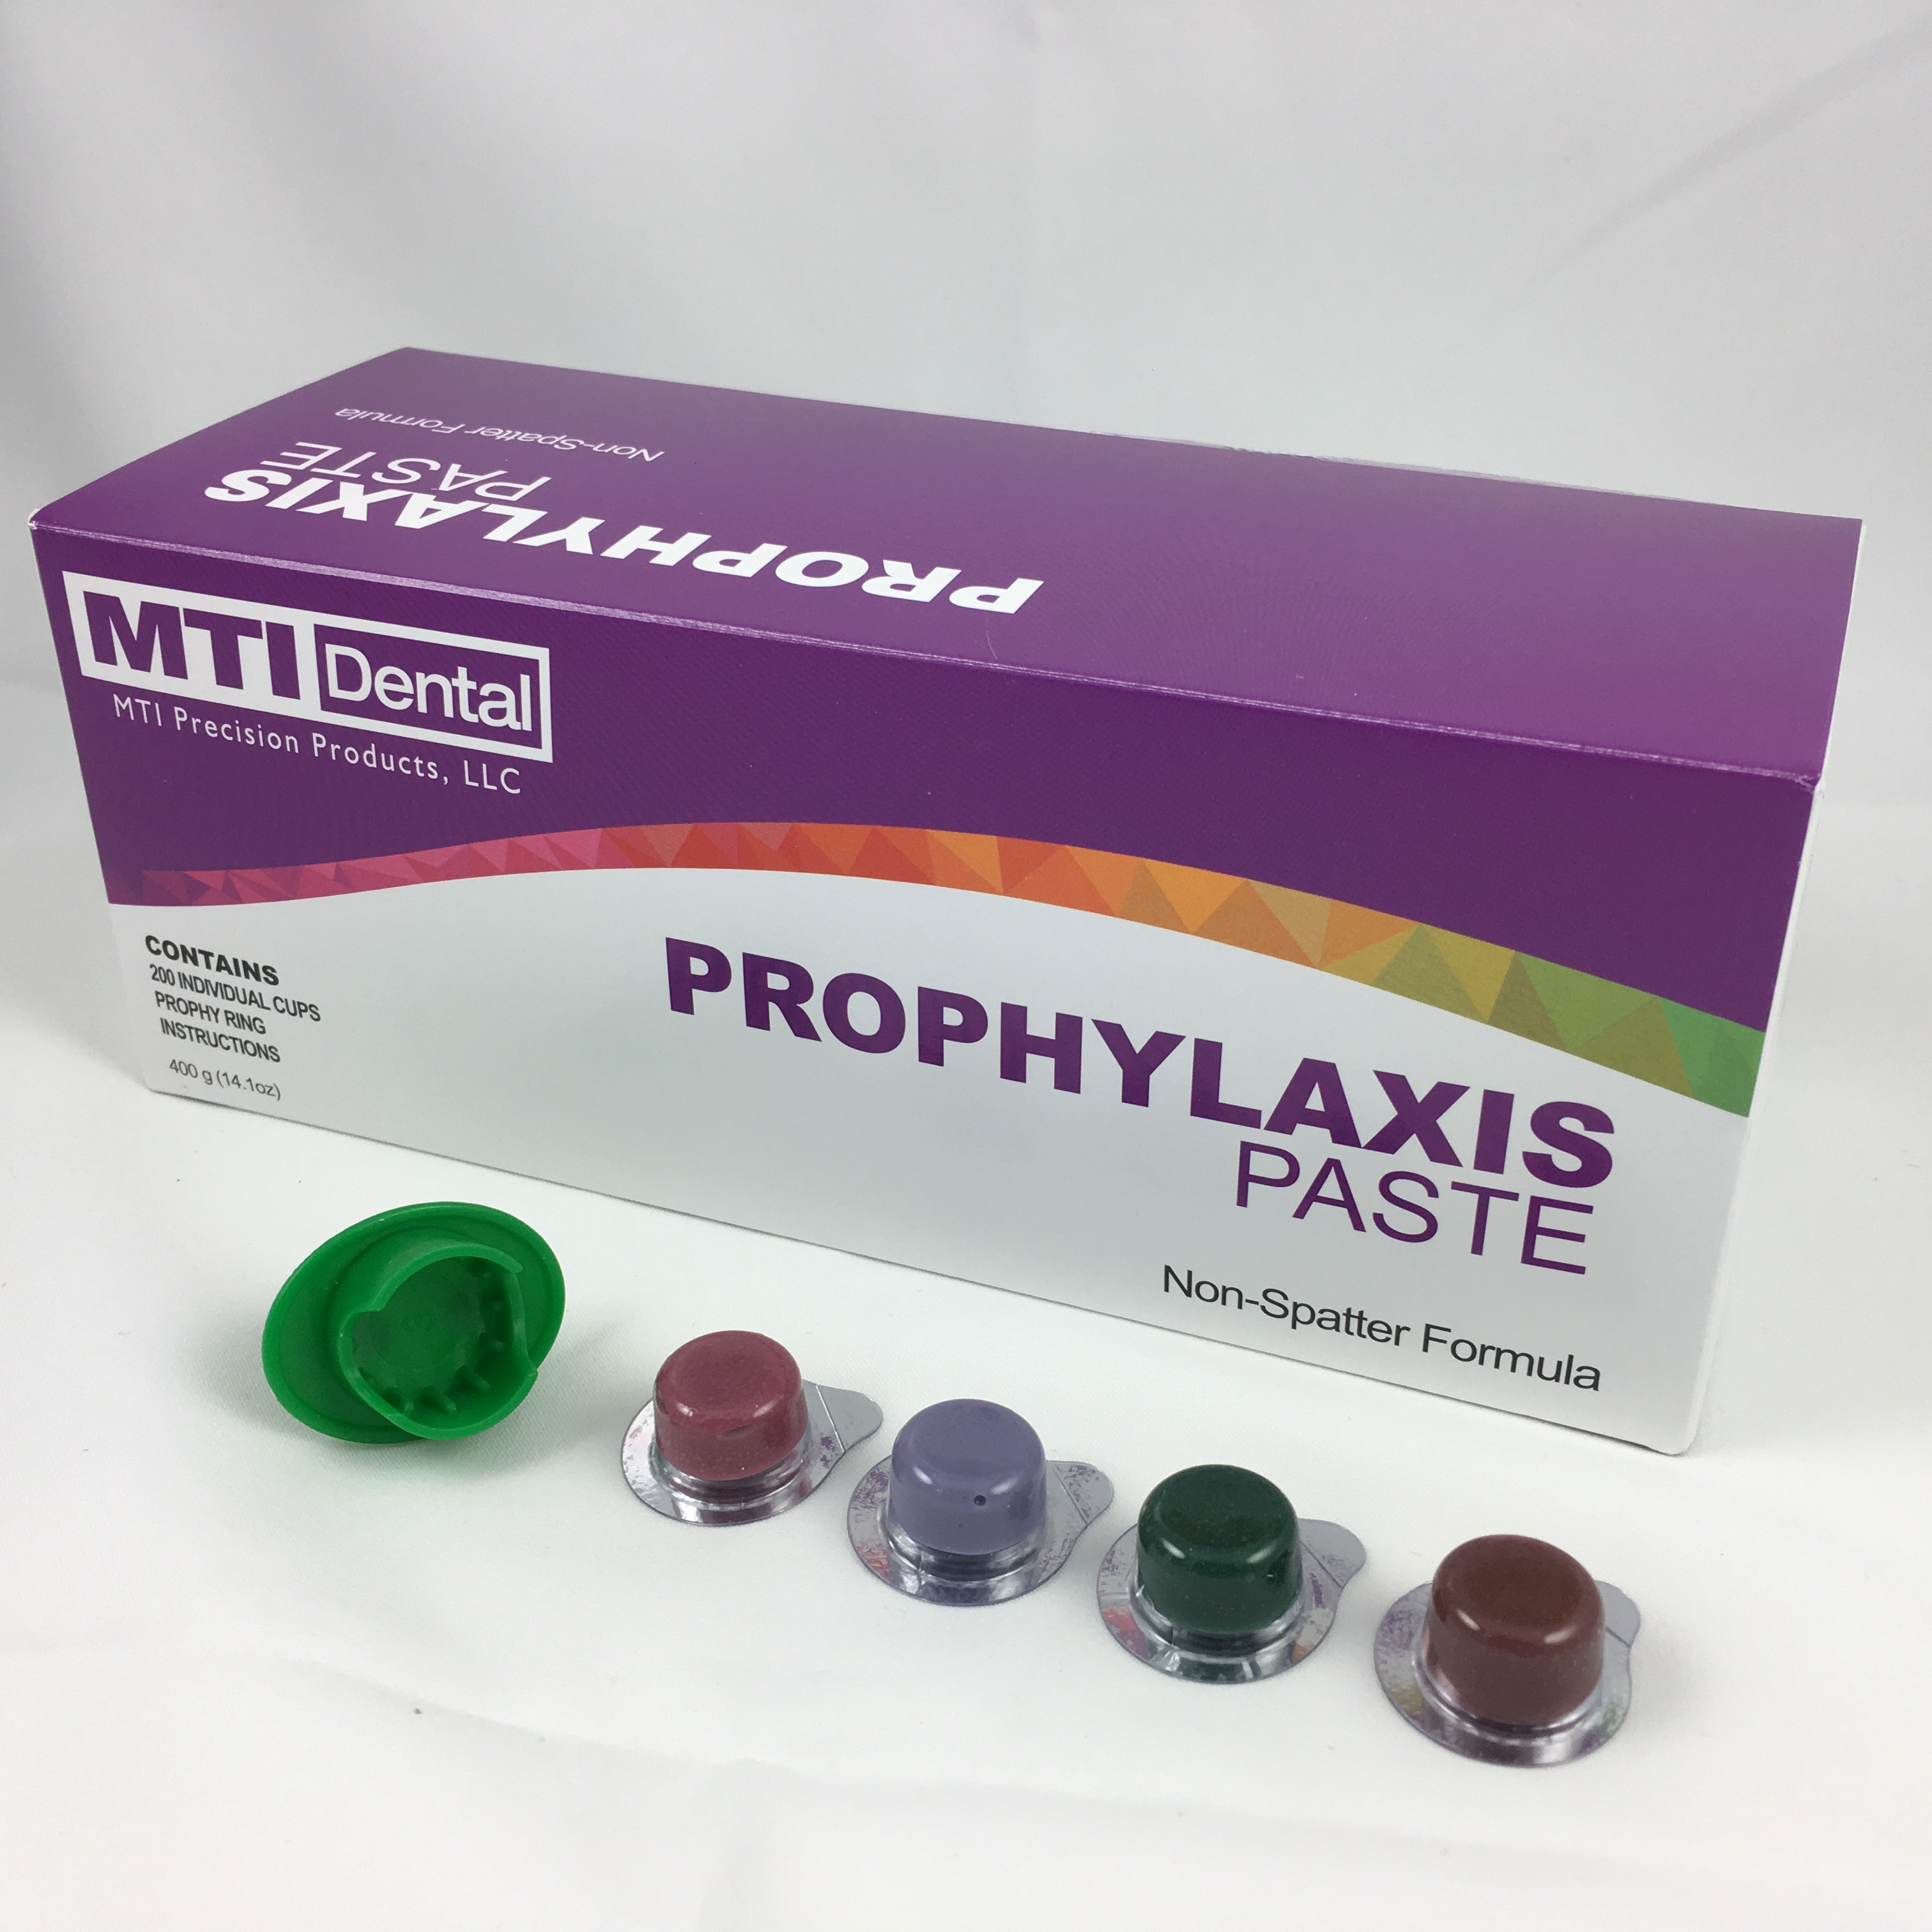 MTI Dental Introduces First Line of Prophylaxis Paste